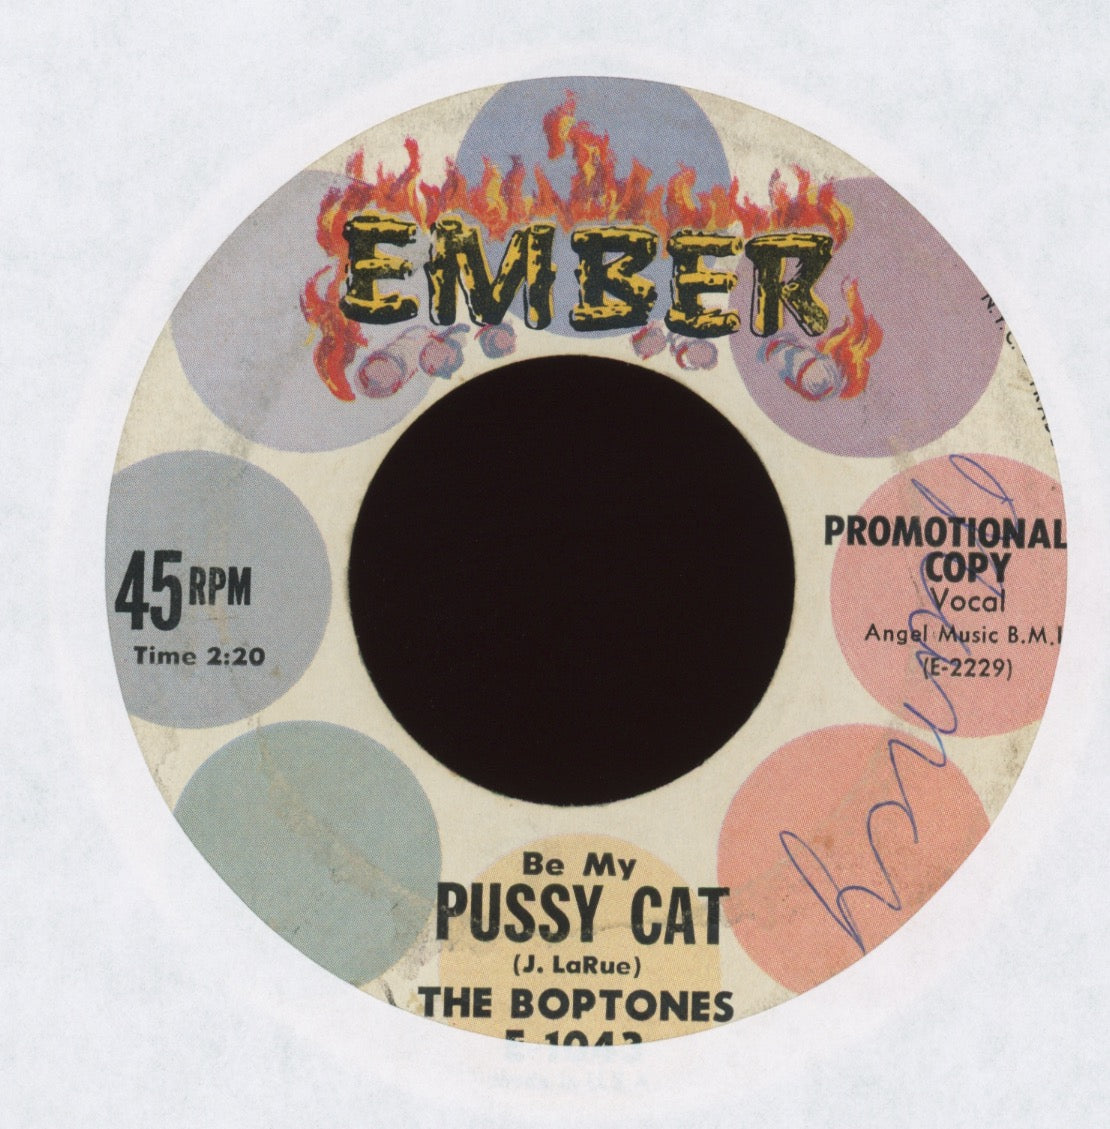 The Boptones - Be My Pussy Cat on Ember Promo